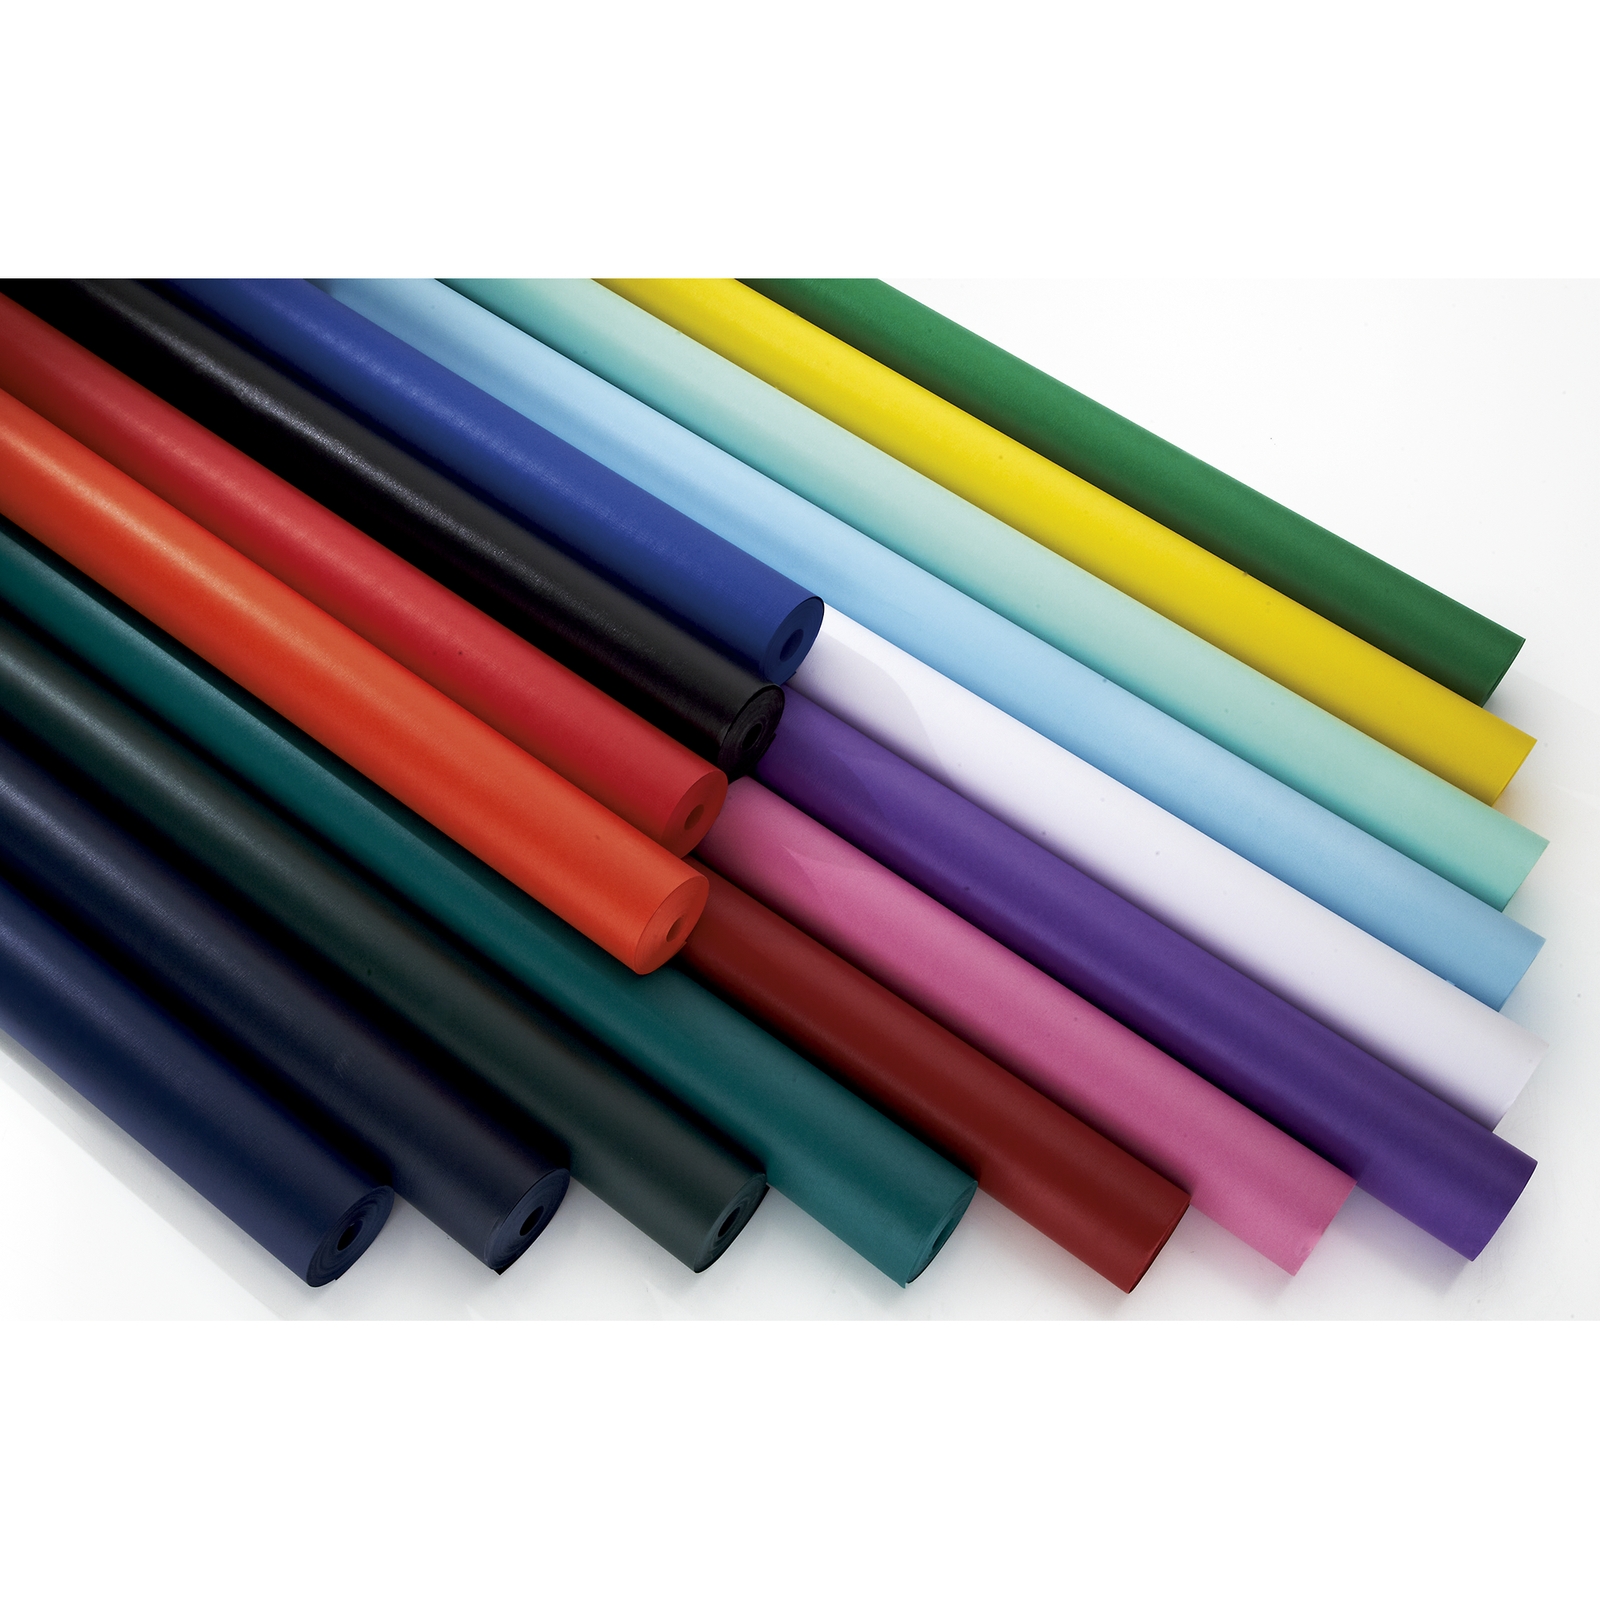 EduCraft Jumbo Durafrieze Wipeable Poster Display Roll - 1020mm x 25m - Assorted - Pack of 8